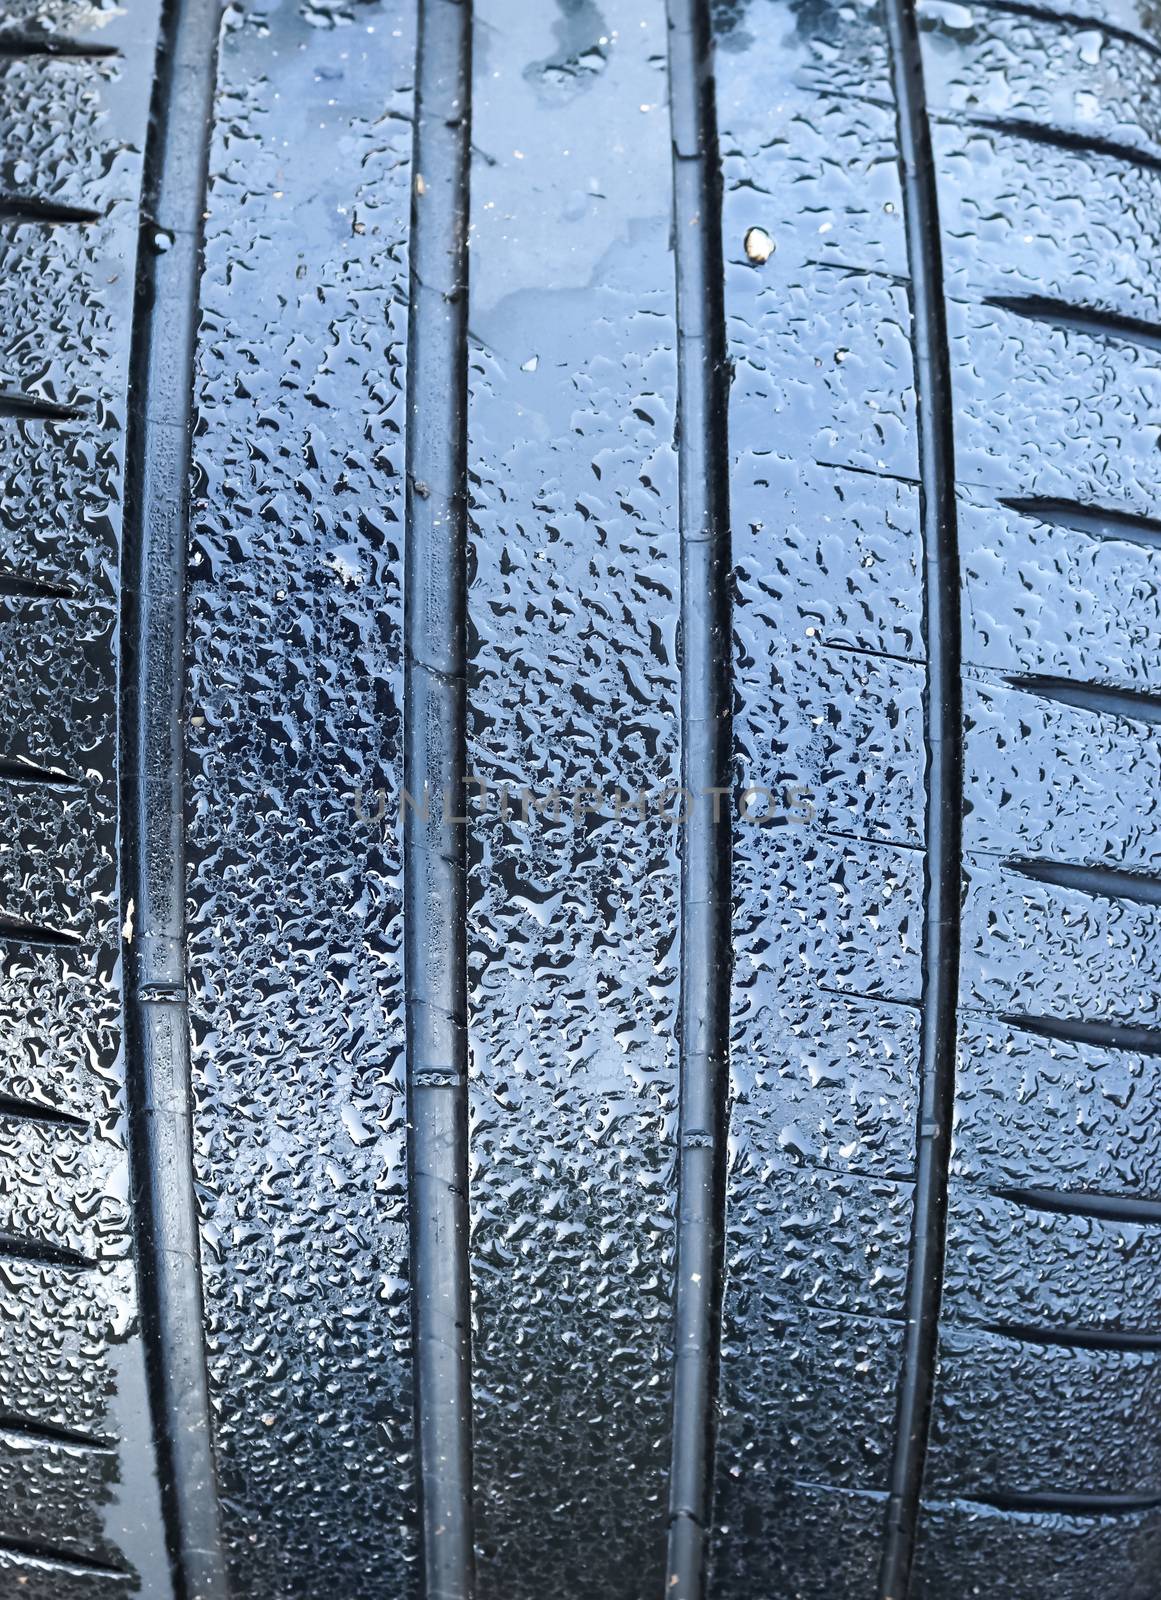 Black big tires in a close up view with water drops. Tire tread  by MP_foto71